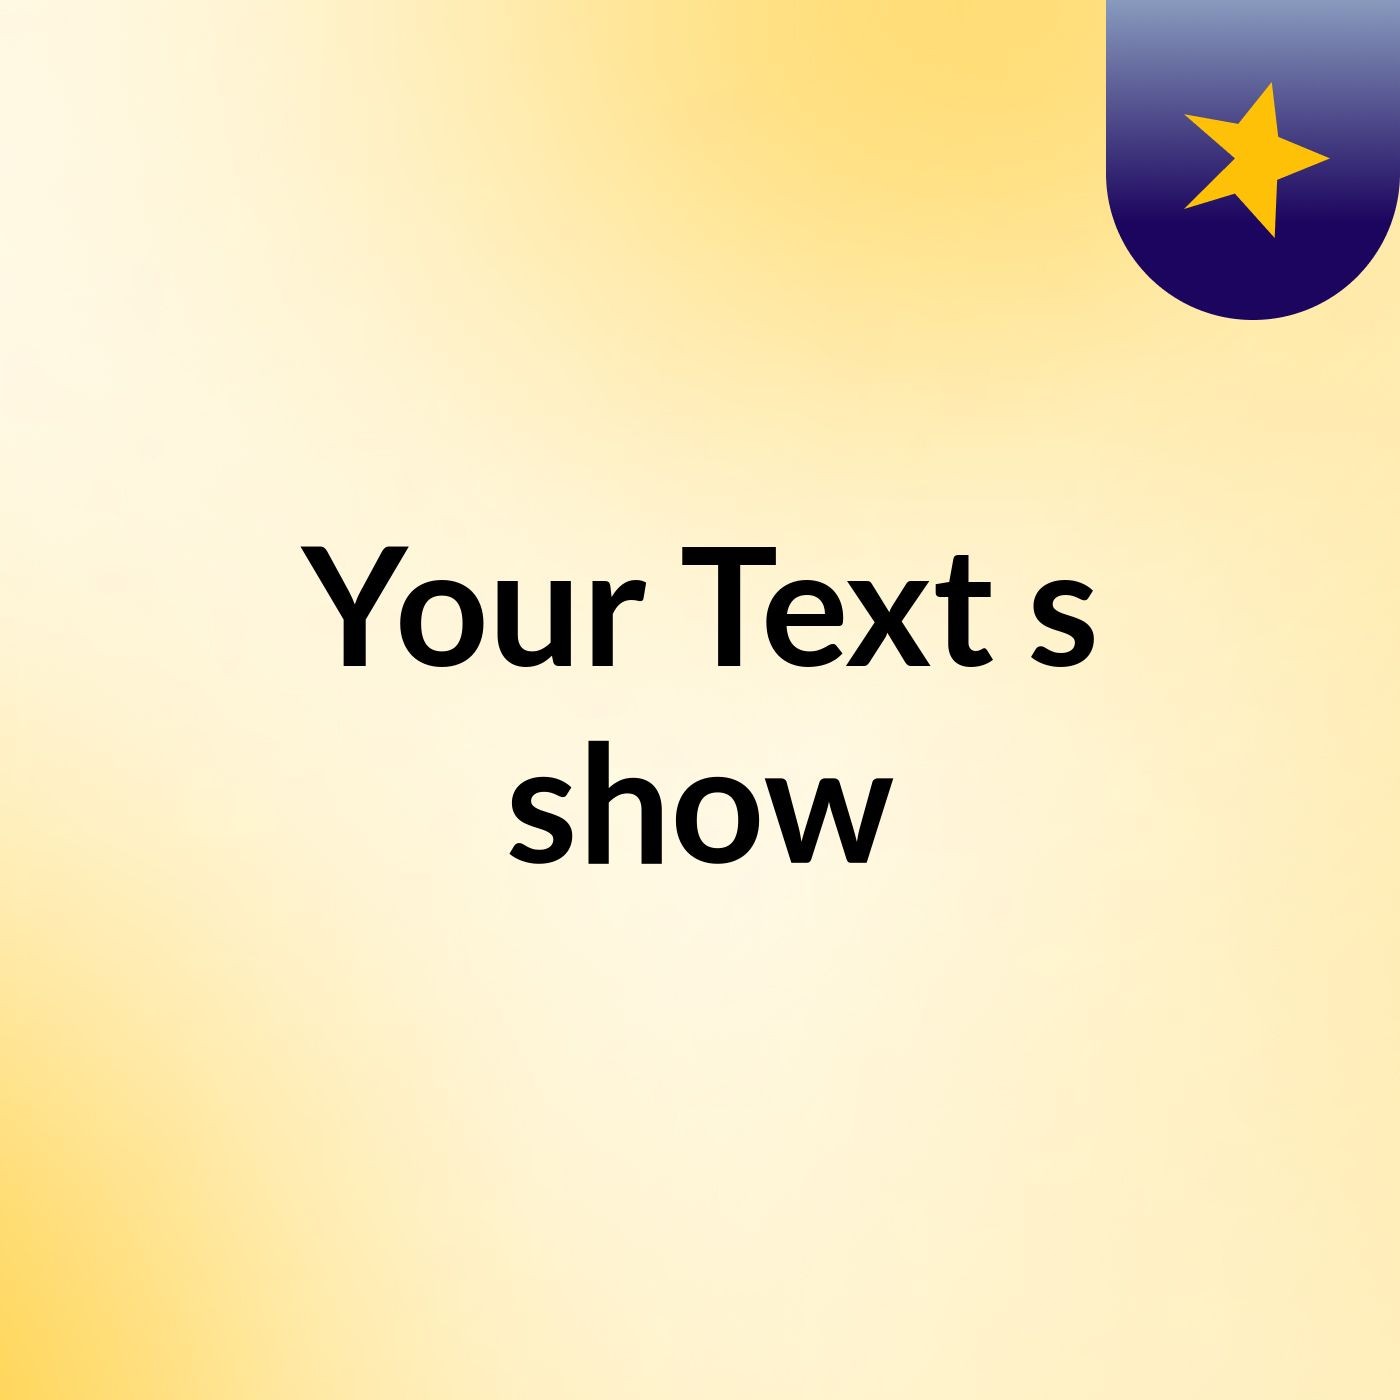 Your Text's show